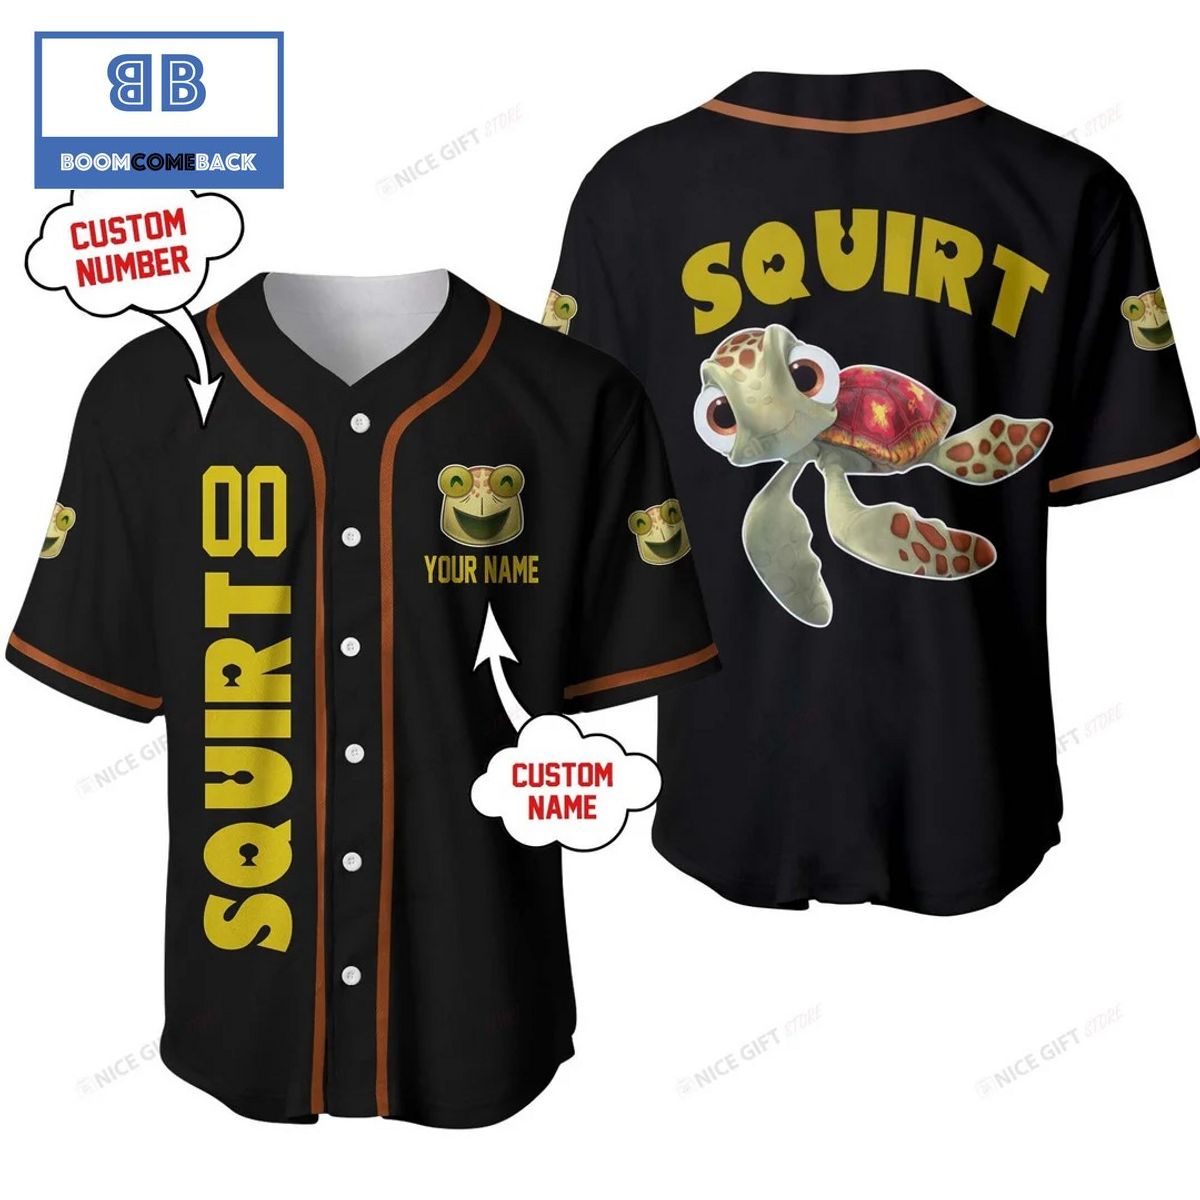 Personalized Finding Nemo Squirt Baseball